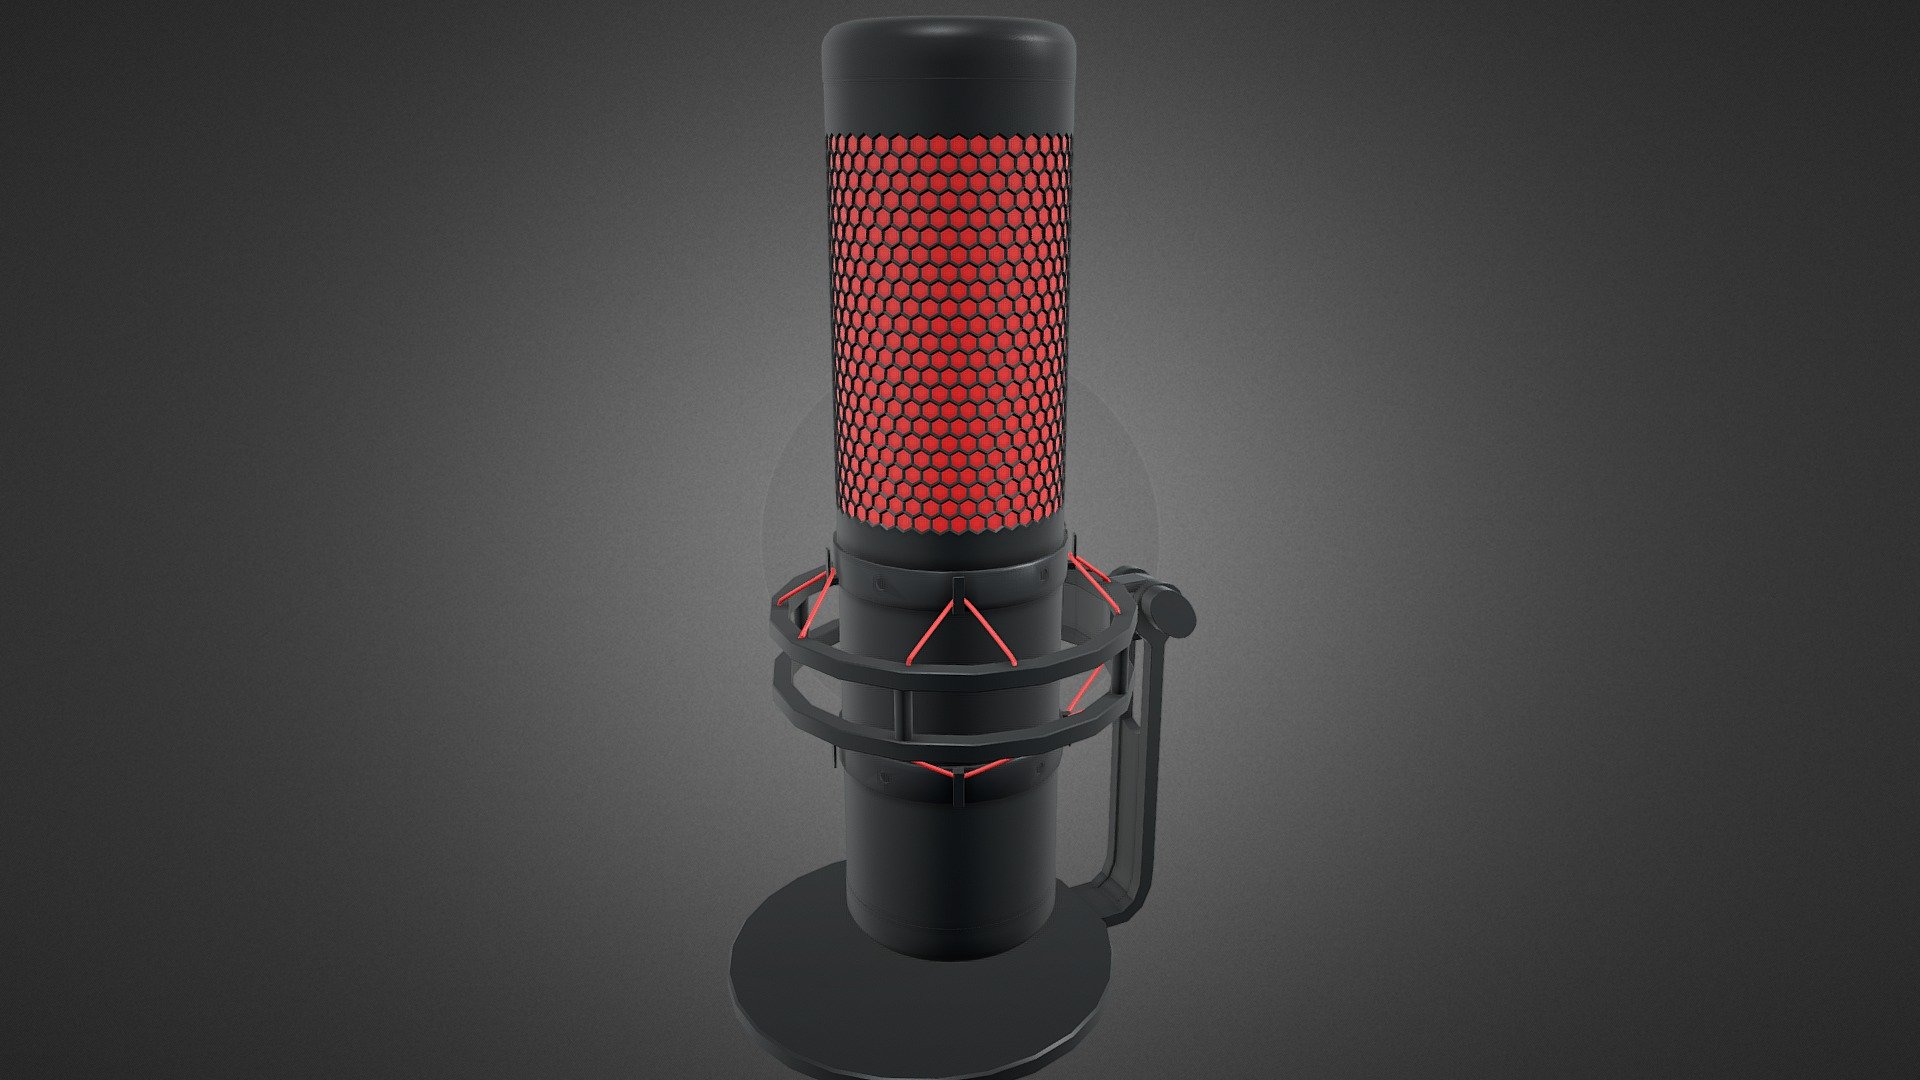 This is a low poly model with every piece that makes up a microphone.
Poly Count: 1,886
Fully unwrapped
Textures: 1k sets: Color, Roughness, and Normal - HyperX Quad Cast Microphone - 3D model by Charisma3DArtist 3d model